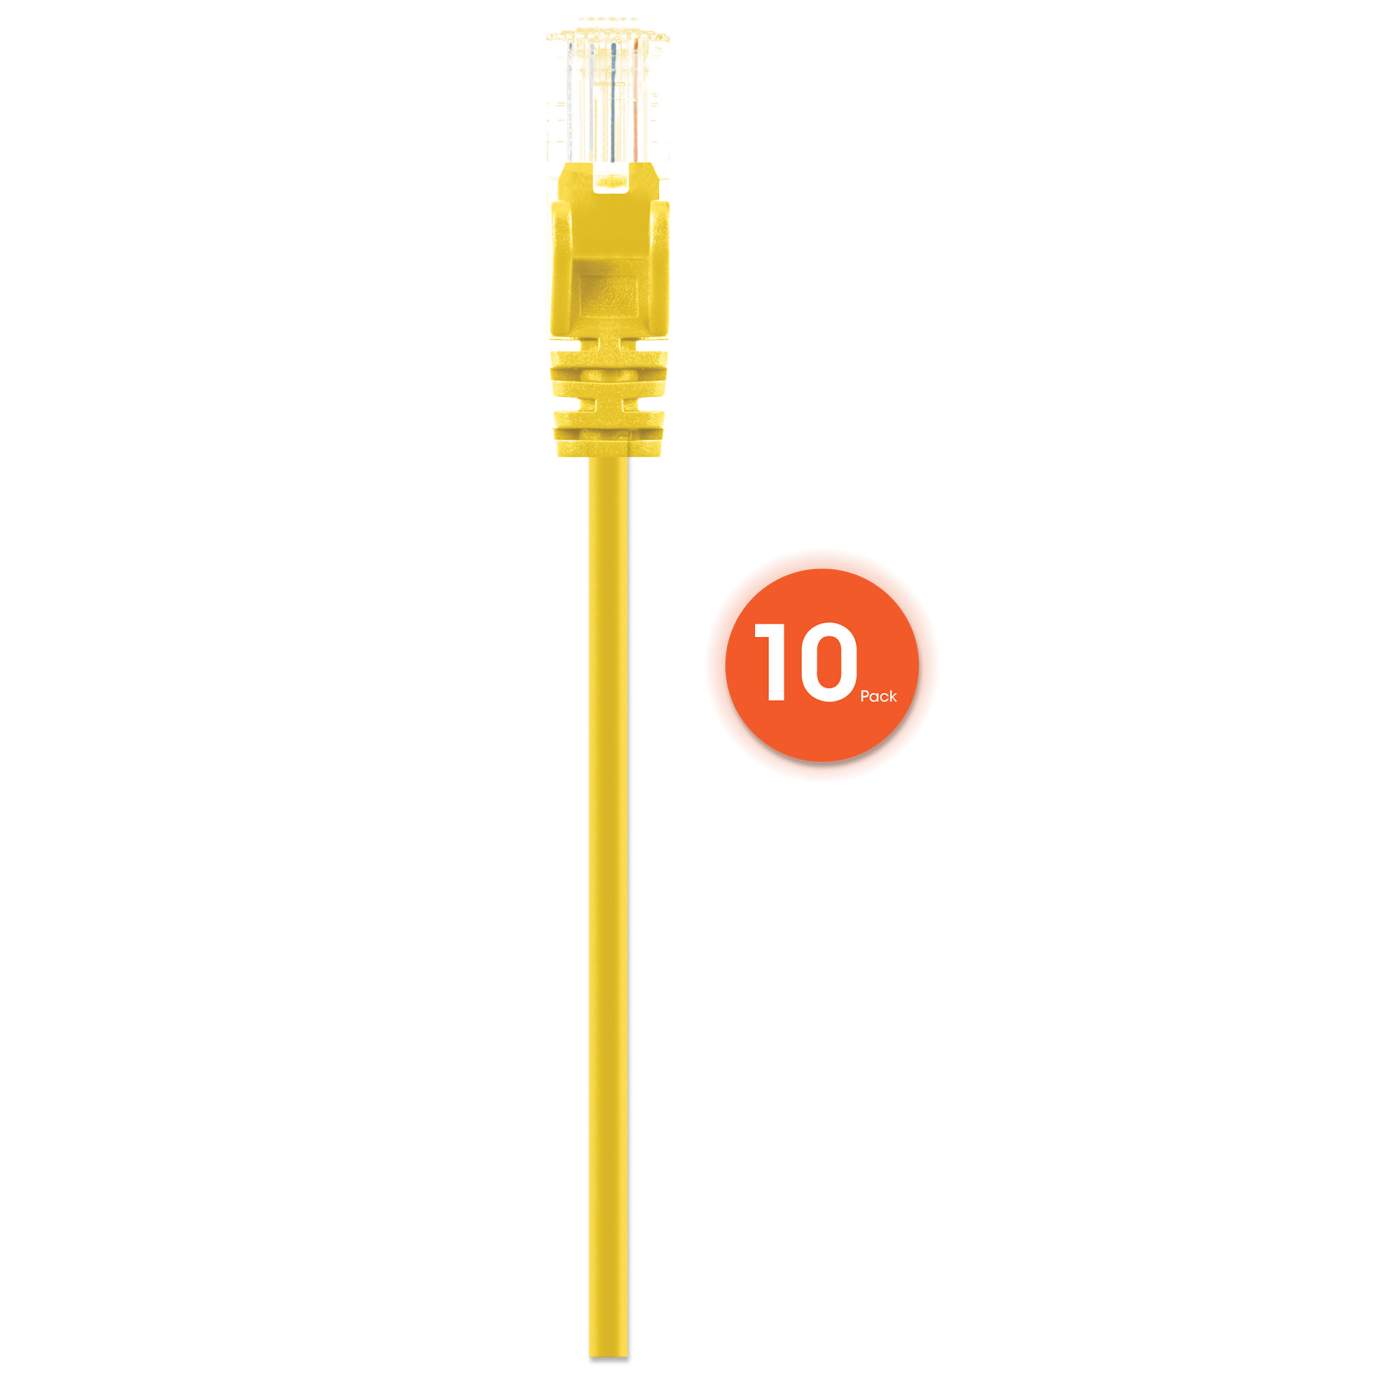 Cat6 U/UTP Slim Network Patch Cable, 14 ft., Yellow, 10-Pack Image 4